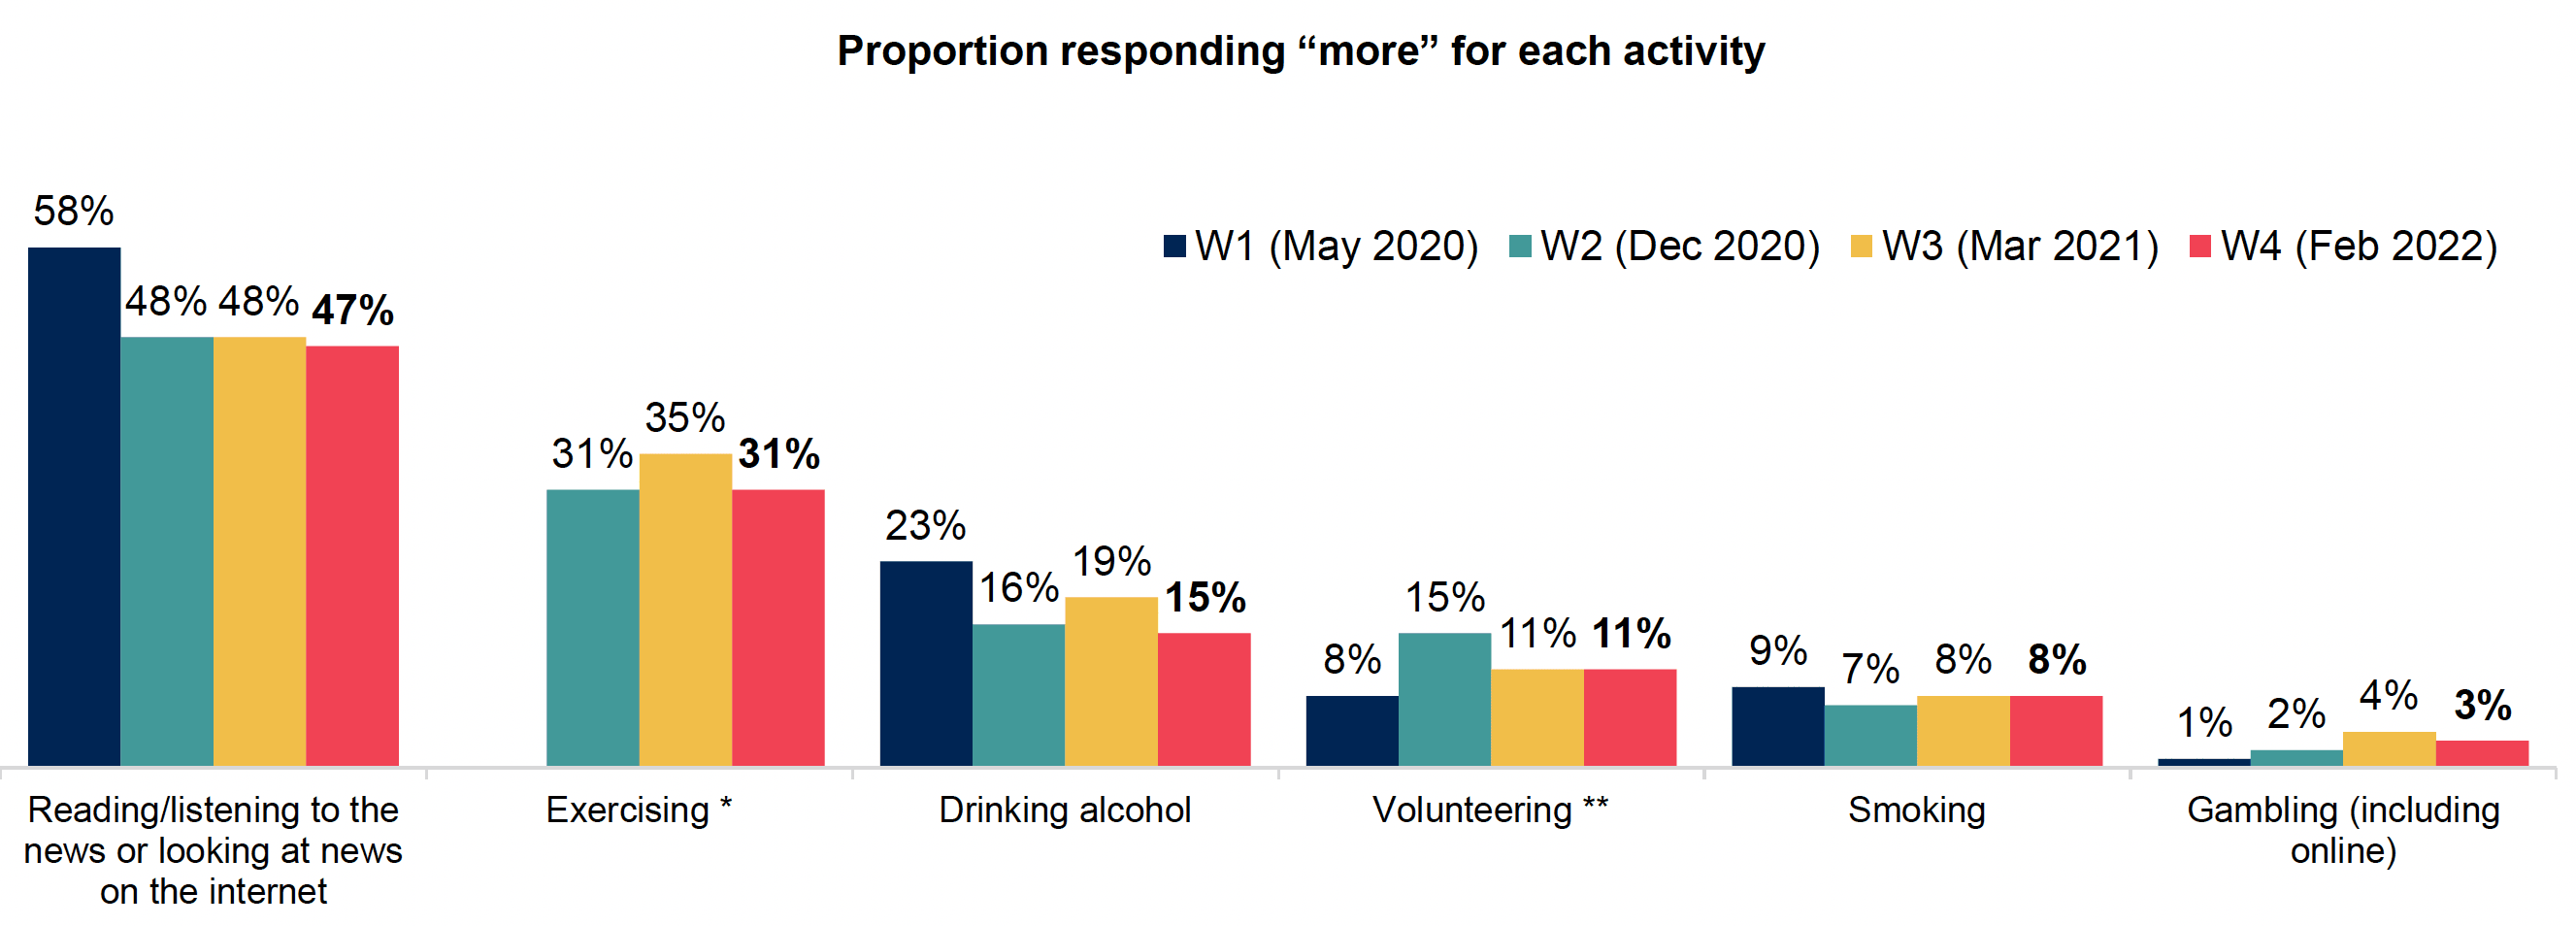 Bar chart showing proportions doing different activities more (compared to pre-pandemic) over the four waves, with 47% reading/listening/looking at the news more (similar to waves 2 and 3 but down from 58% in wave 1)